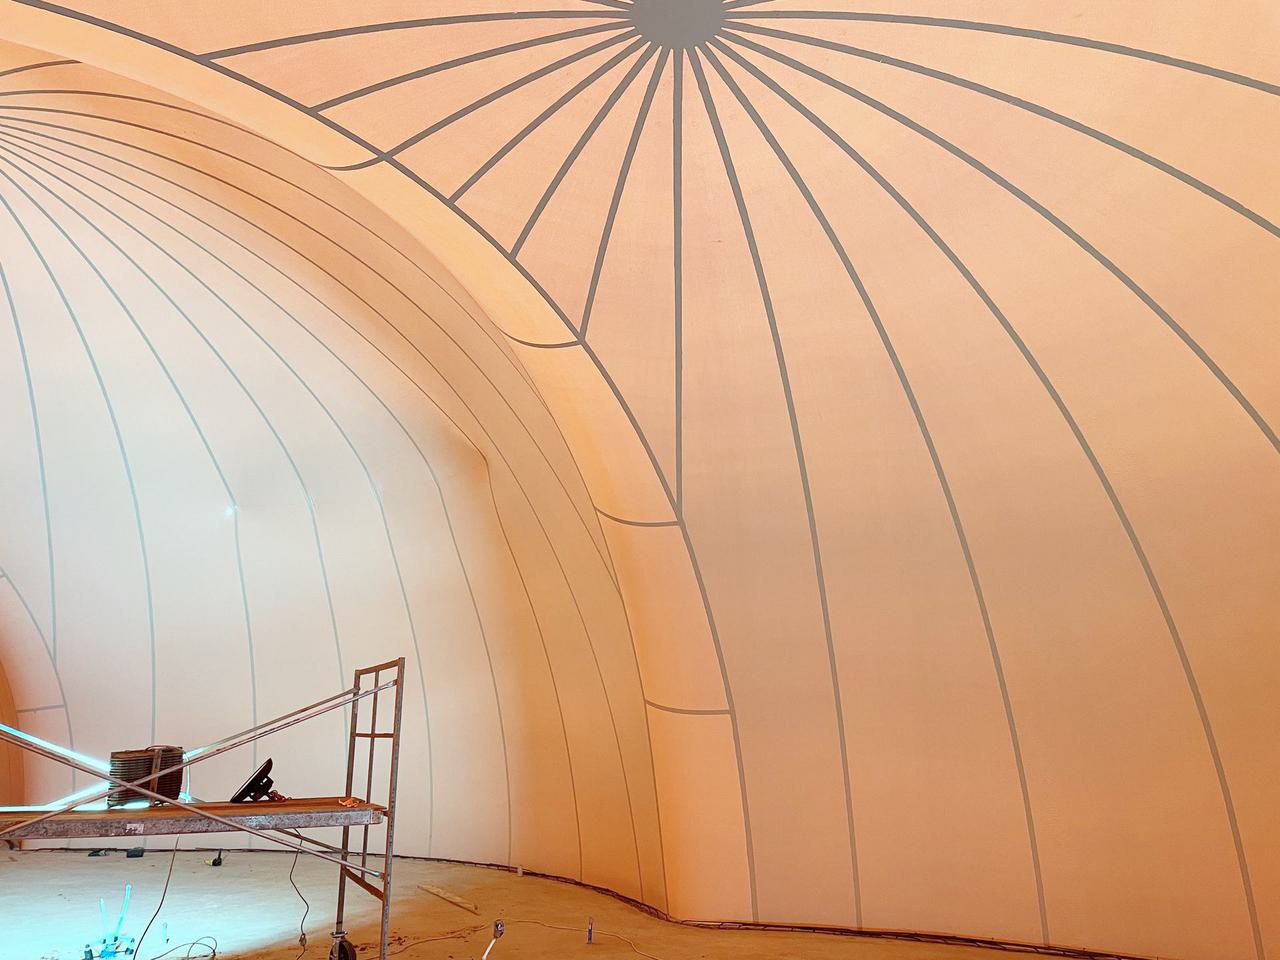 Two starbursts and a saddle in the Airform pattern for this dome home comprised of four interconnected domes.